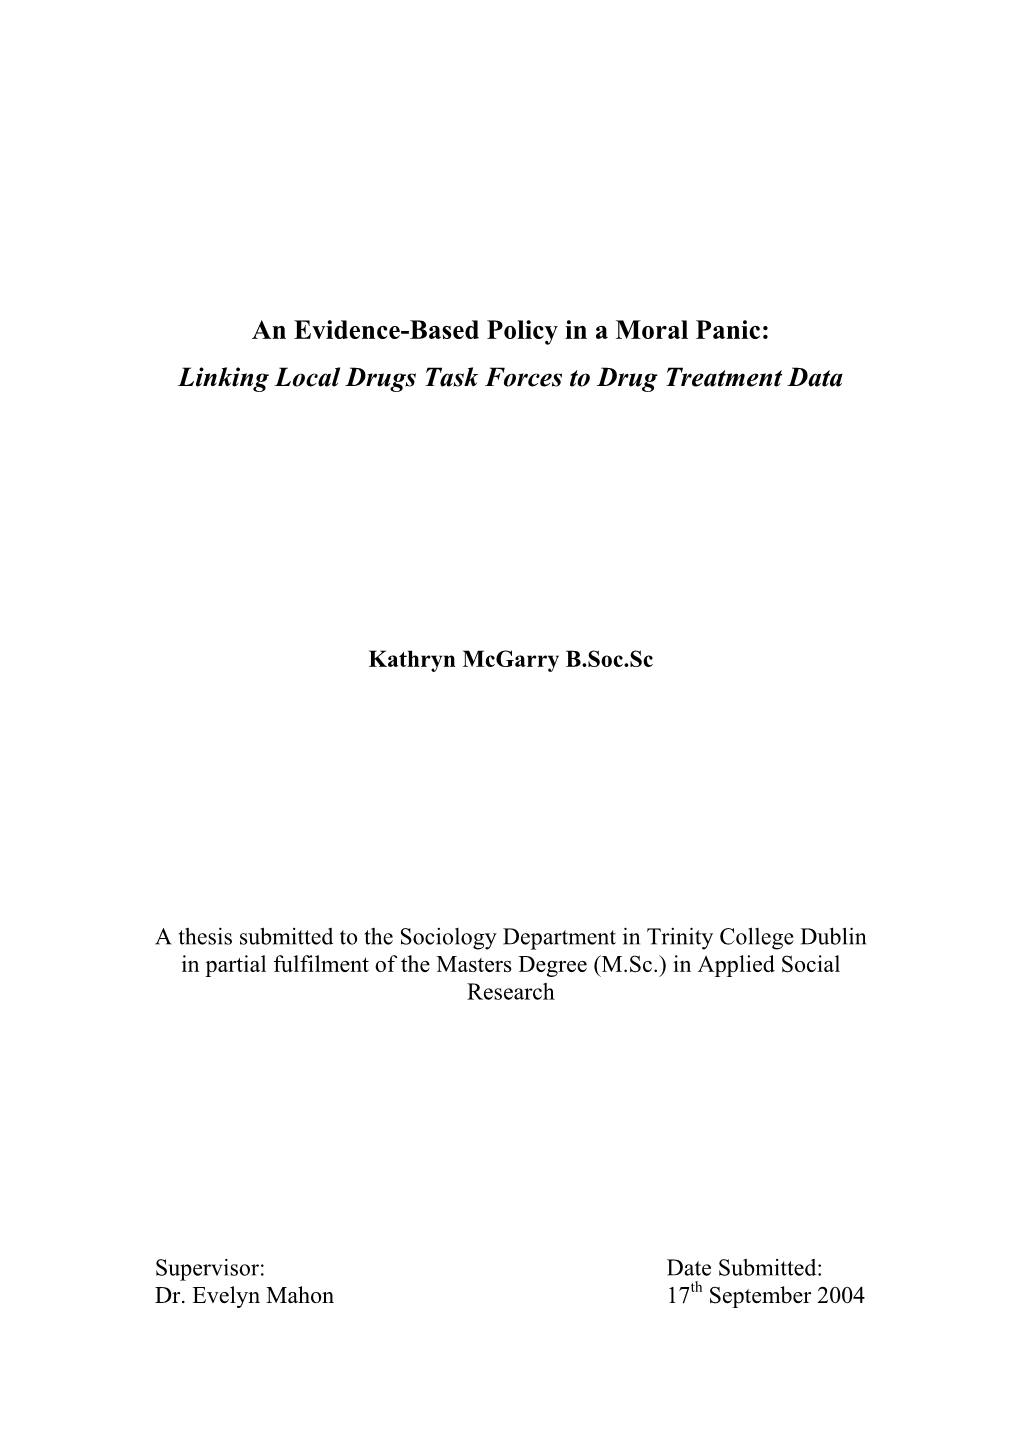 An Evidence-Based Policy in a Moral Panic: Linking Local Drugs Task Forces to Drug Treatment Data